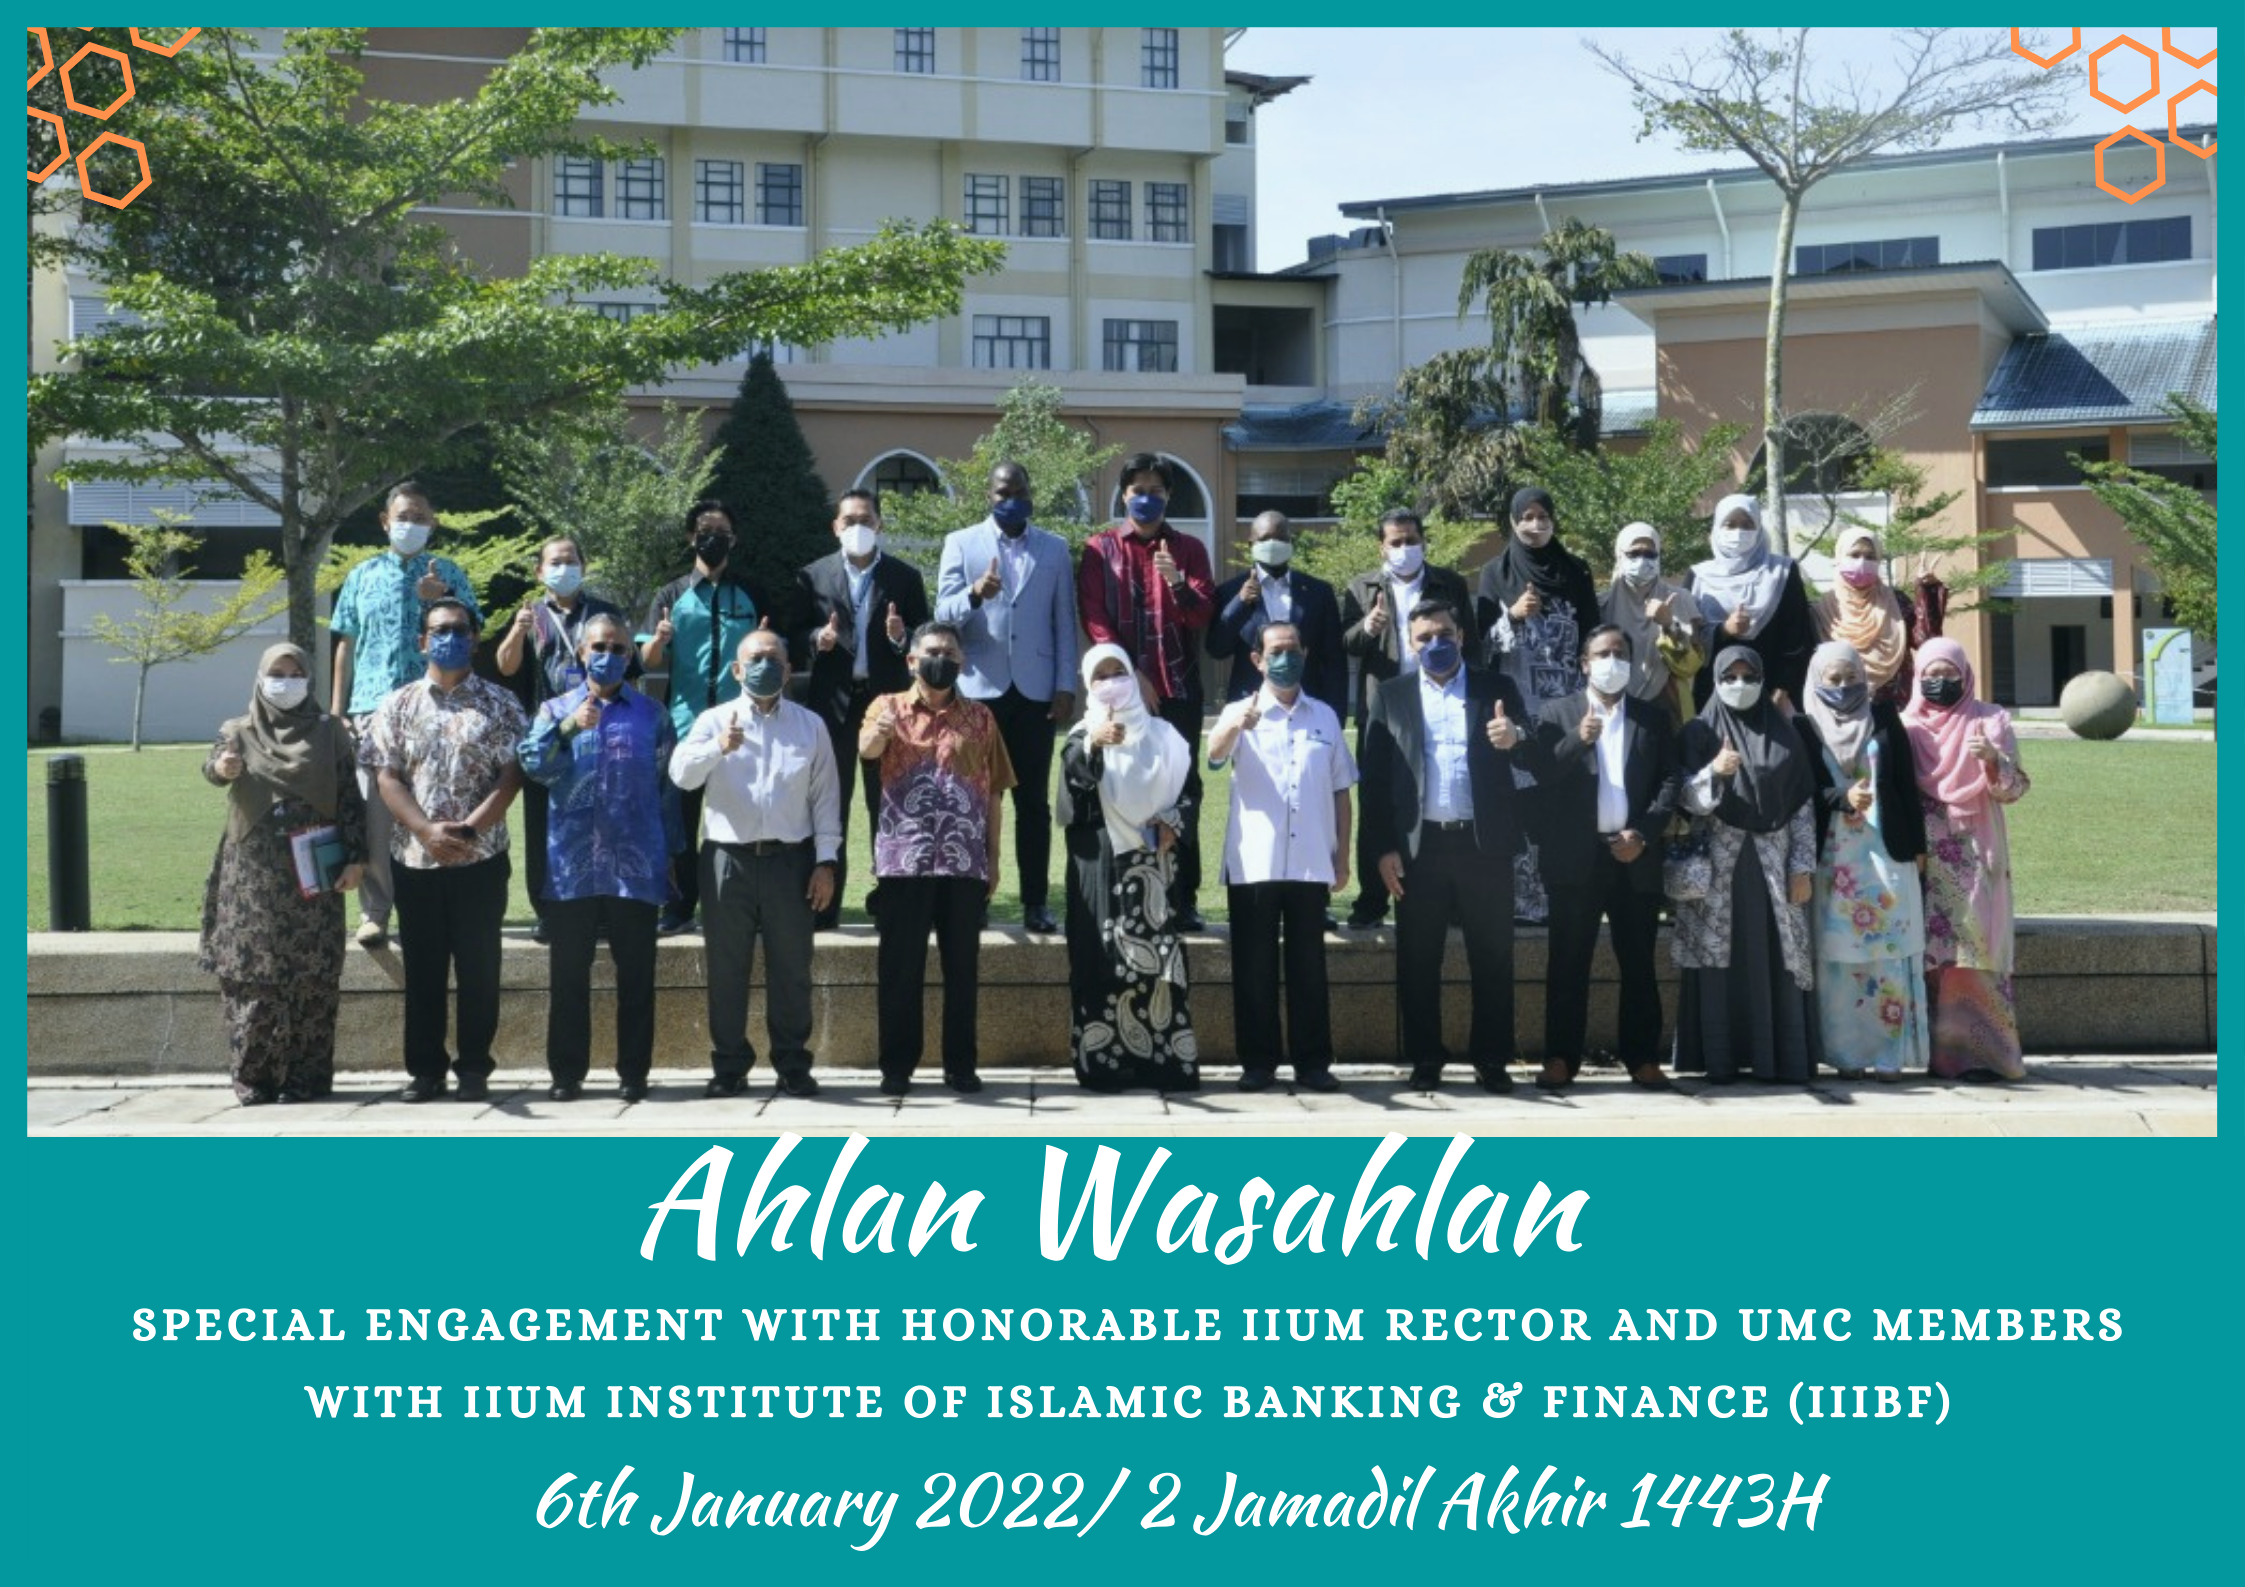 Special Engagement Session with Honorable IIUM Rector and UMC Members